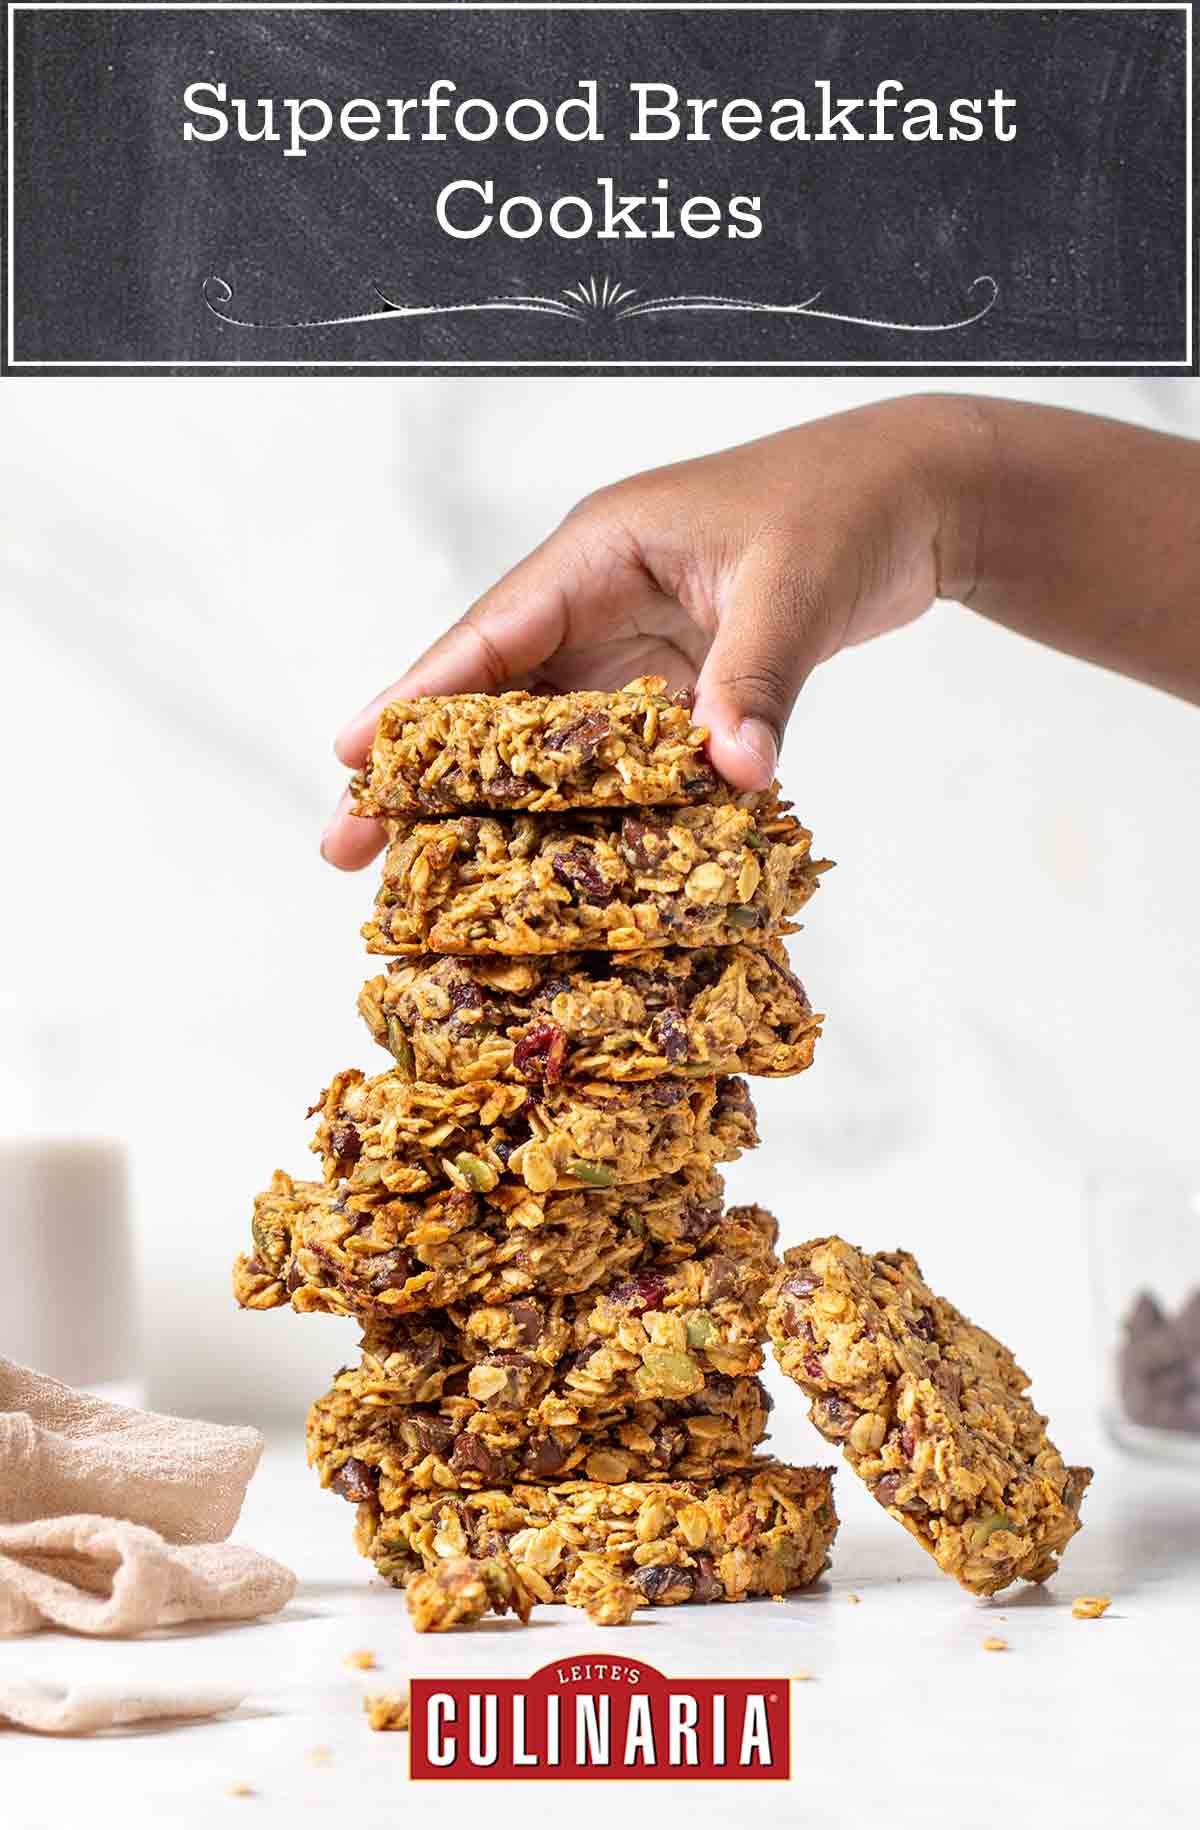 A woman's hand piling up superfood breakfast cookies